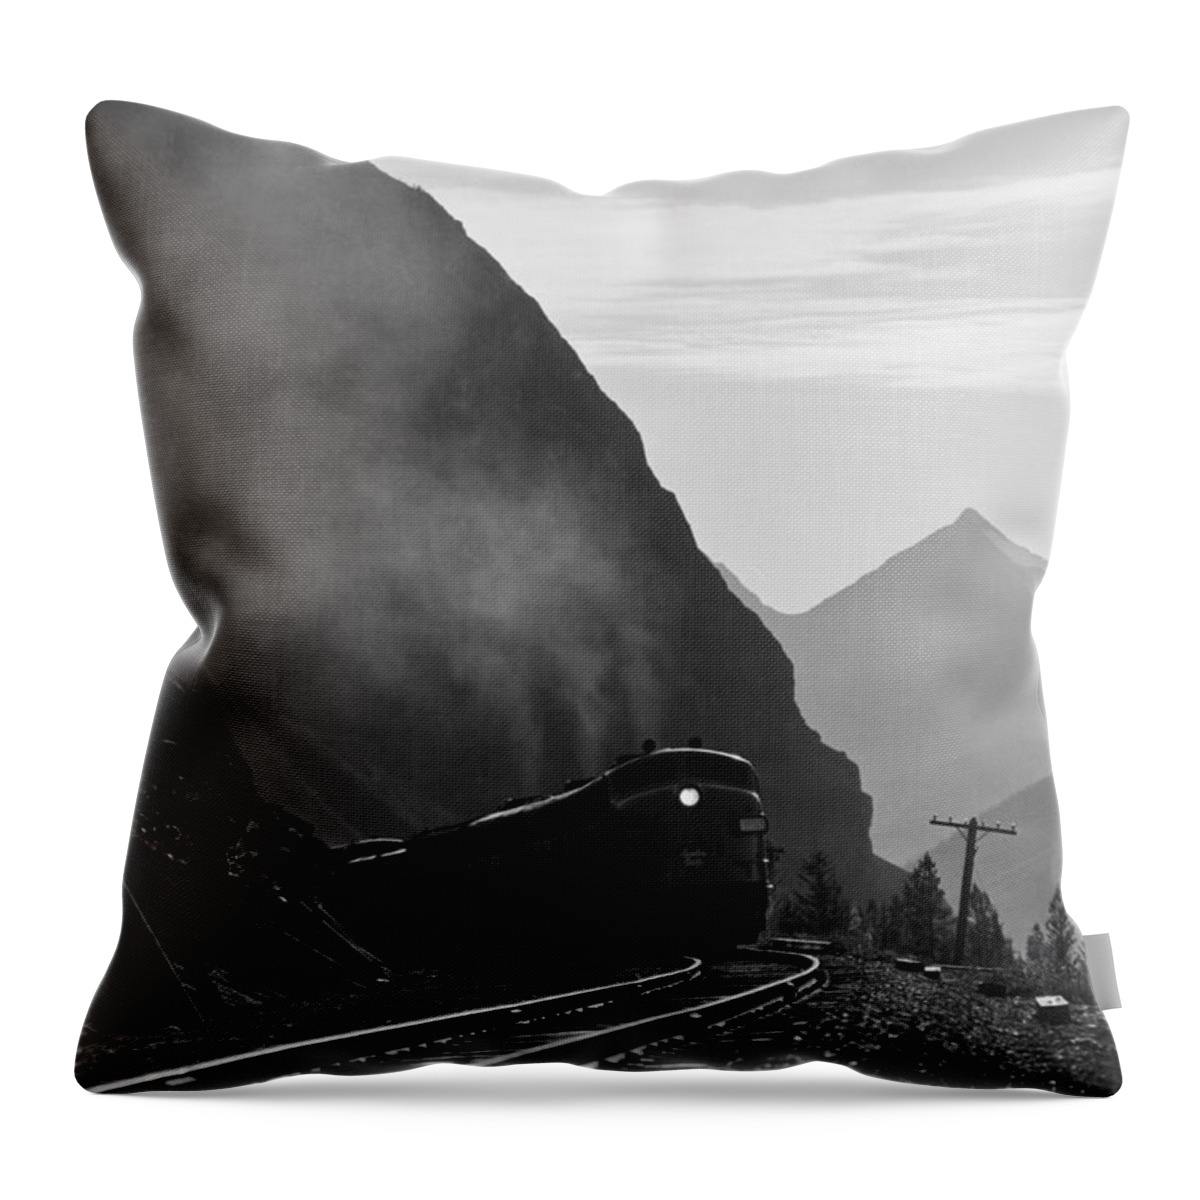 1940's Throw Pillow featuring the photograph Train In Canadian Rockies by Underwood Archives